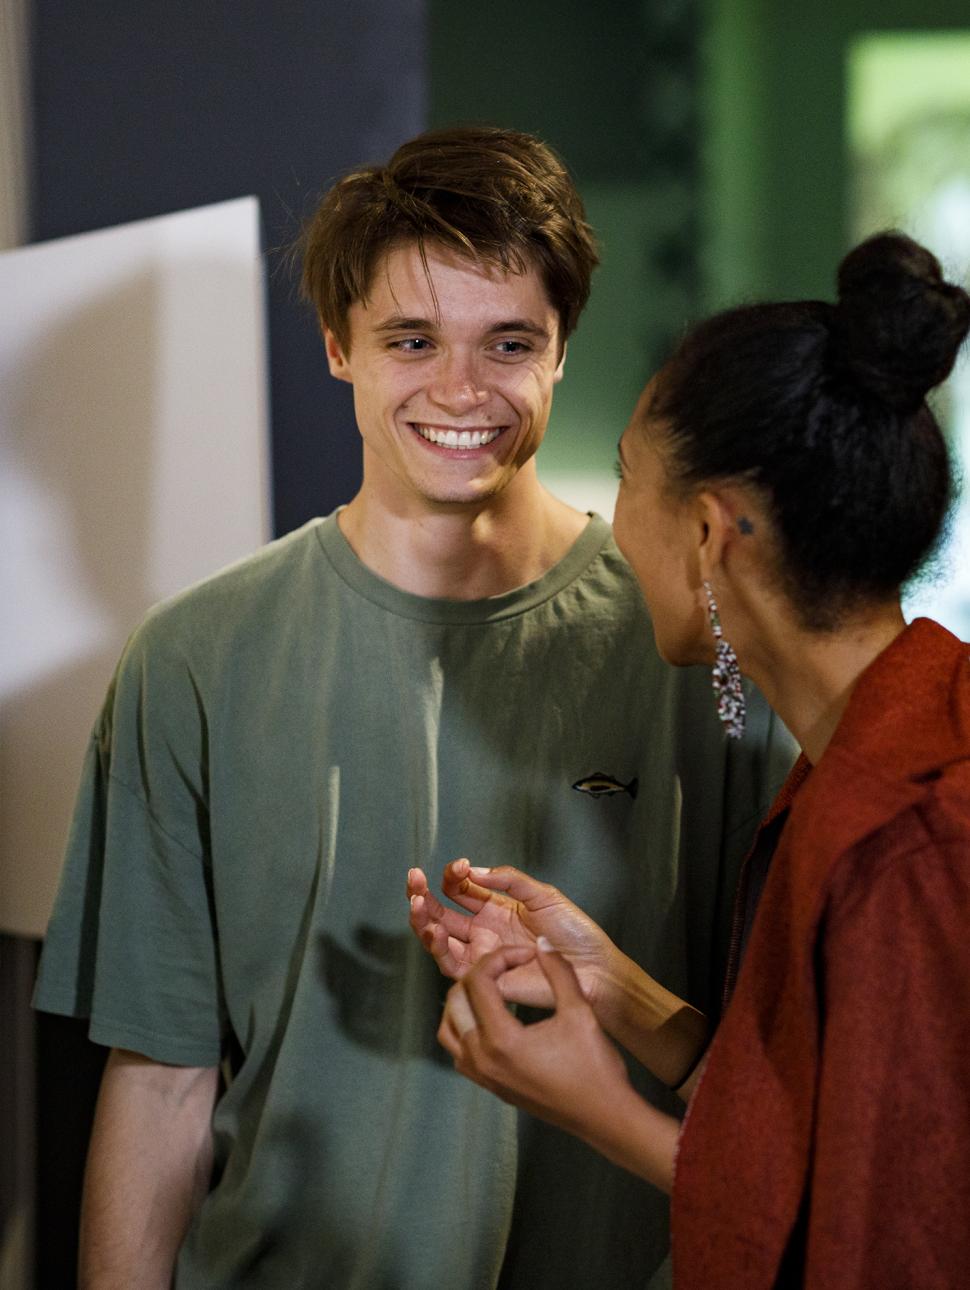 A young tall man in a green shirt speaks to a girl in red